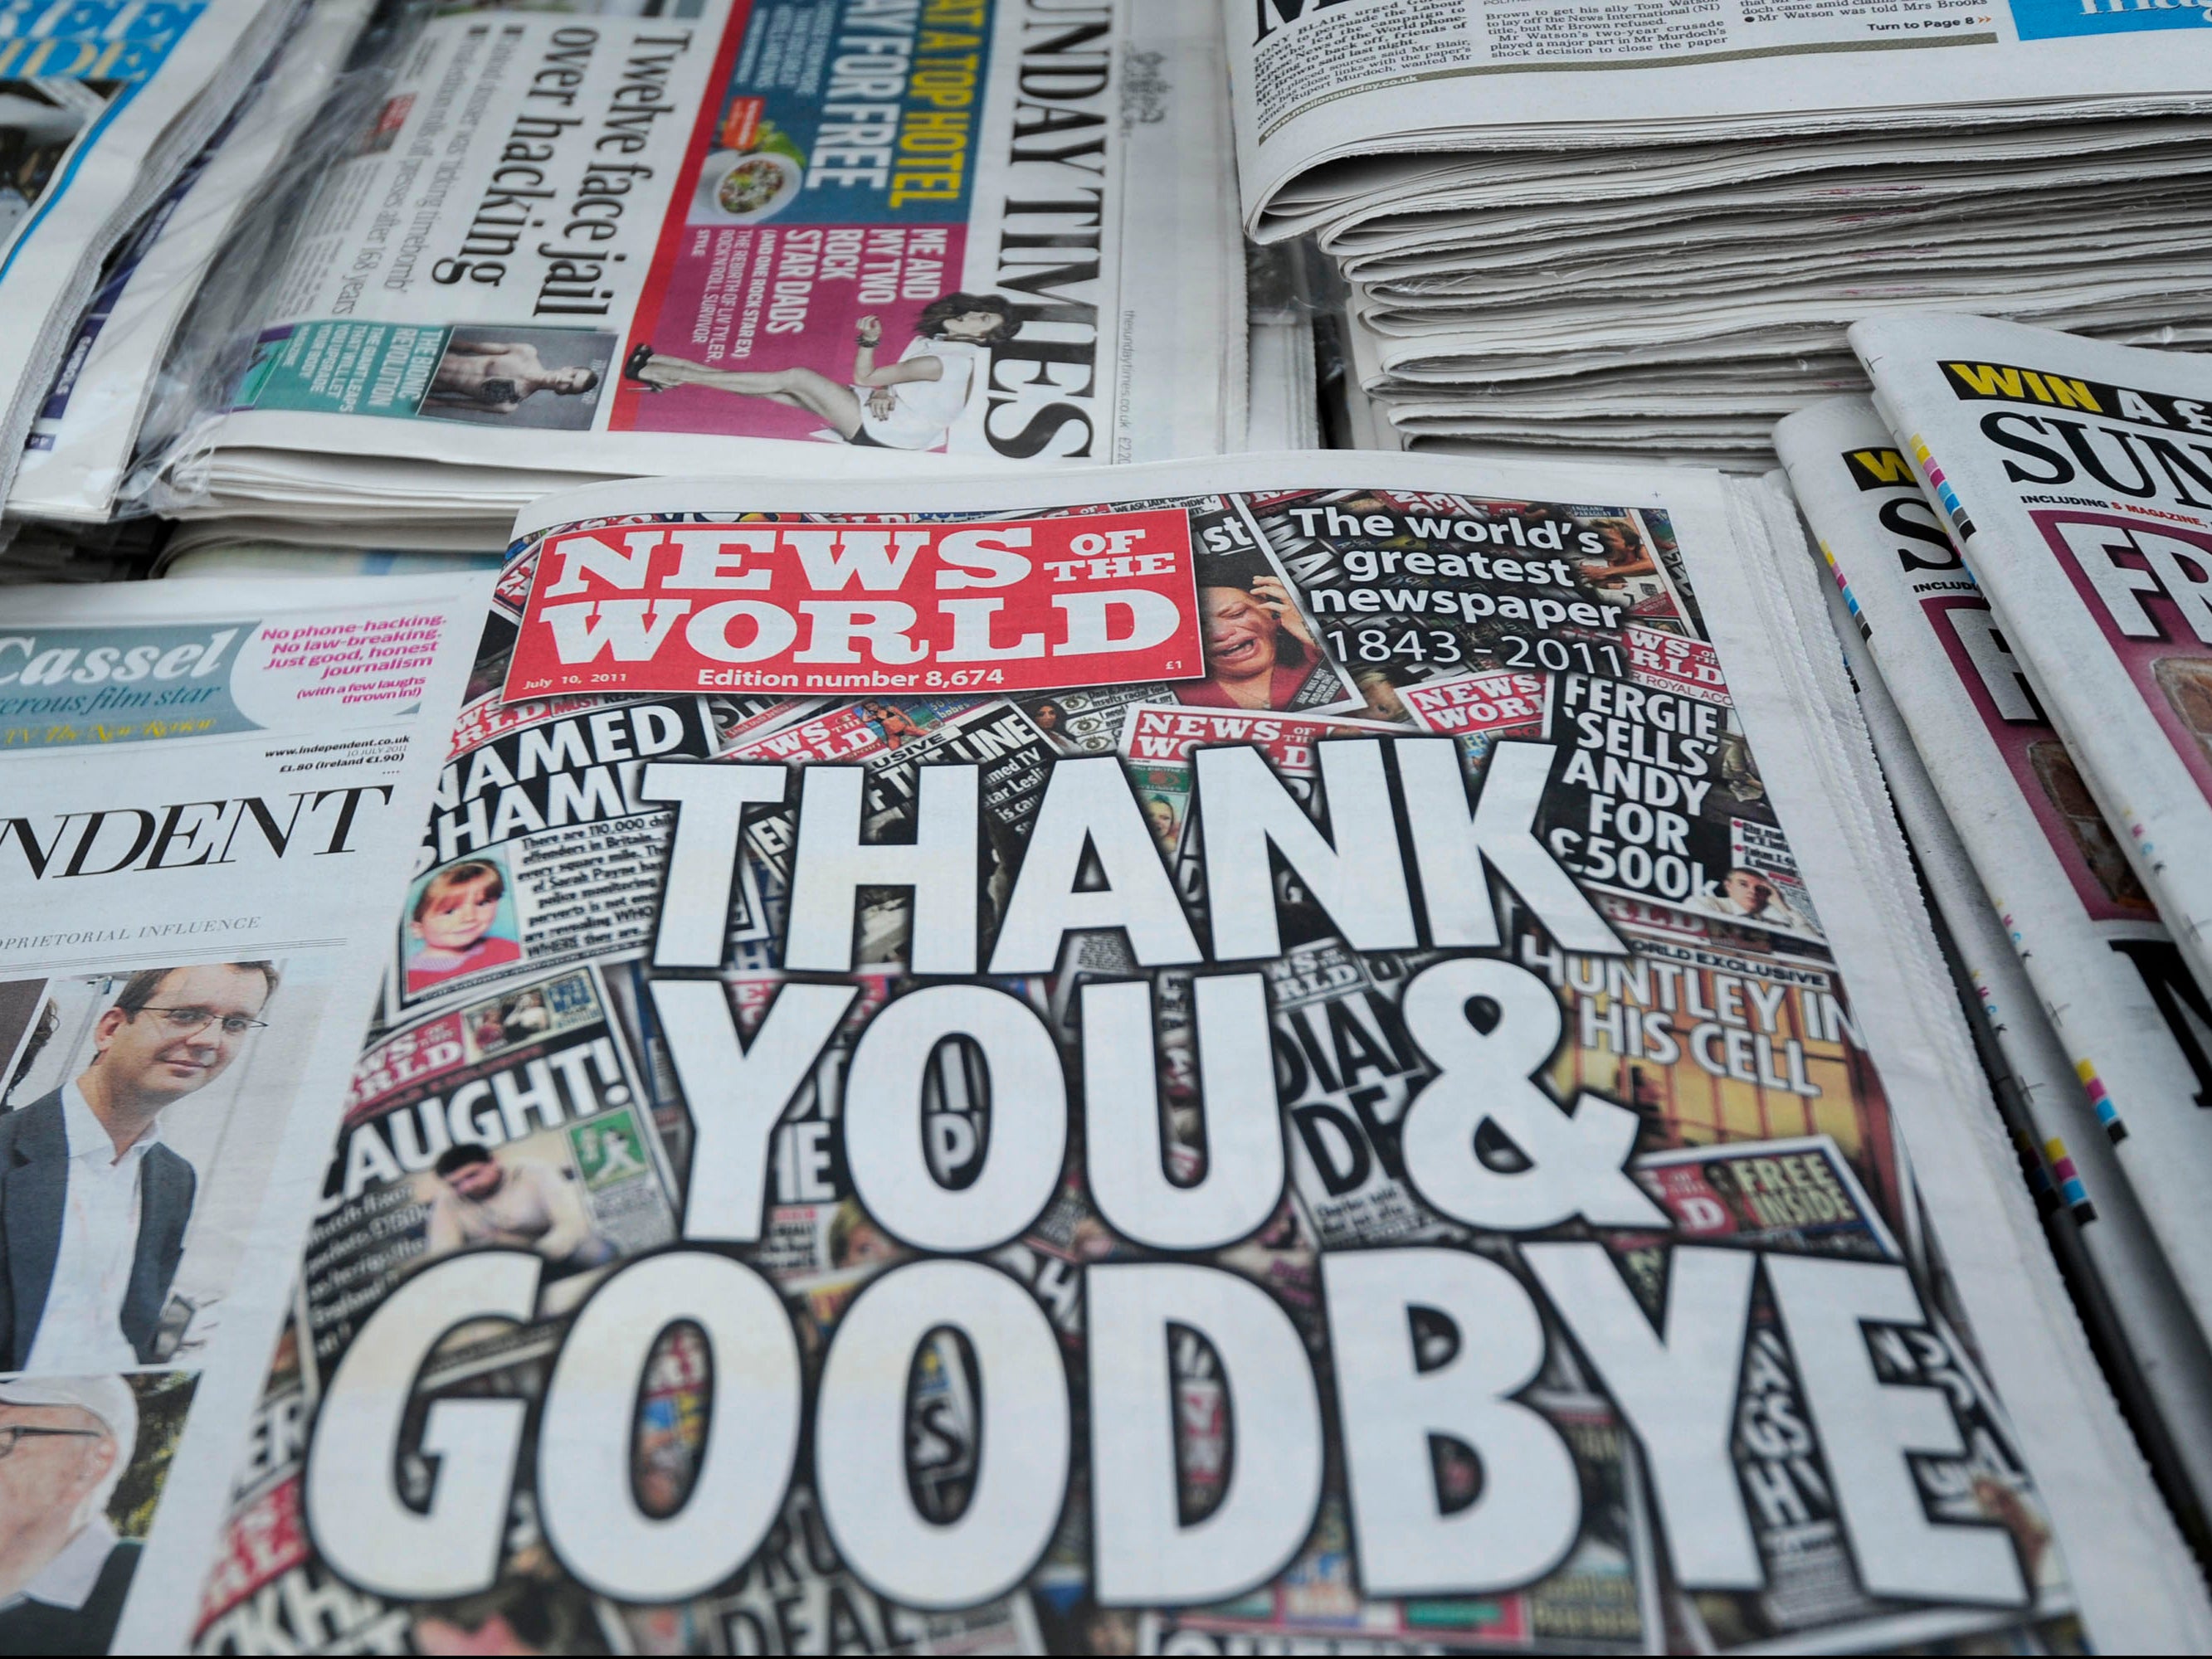 The final edition of the News of the World, following its closure amid the 2011 phone hacking scandal